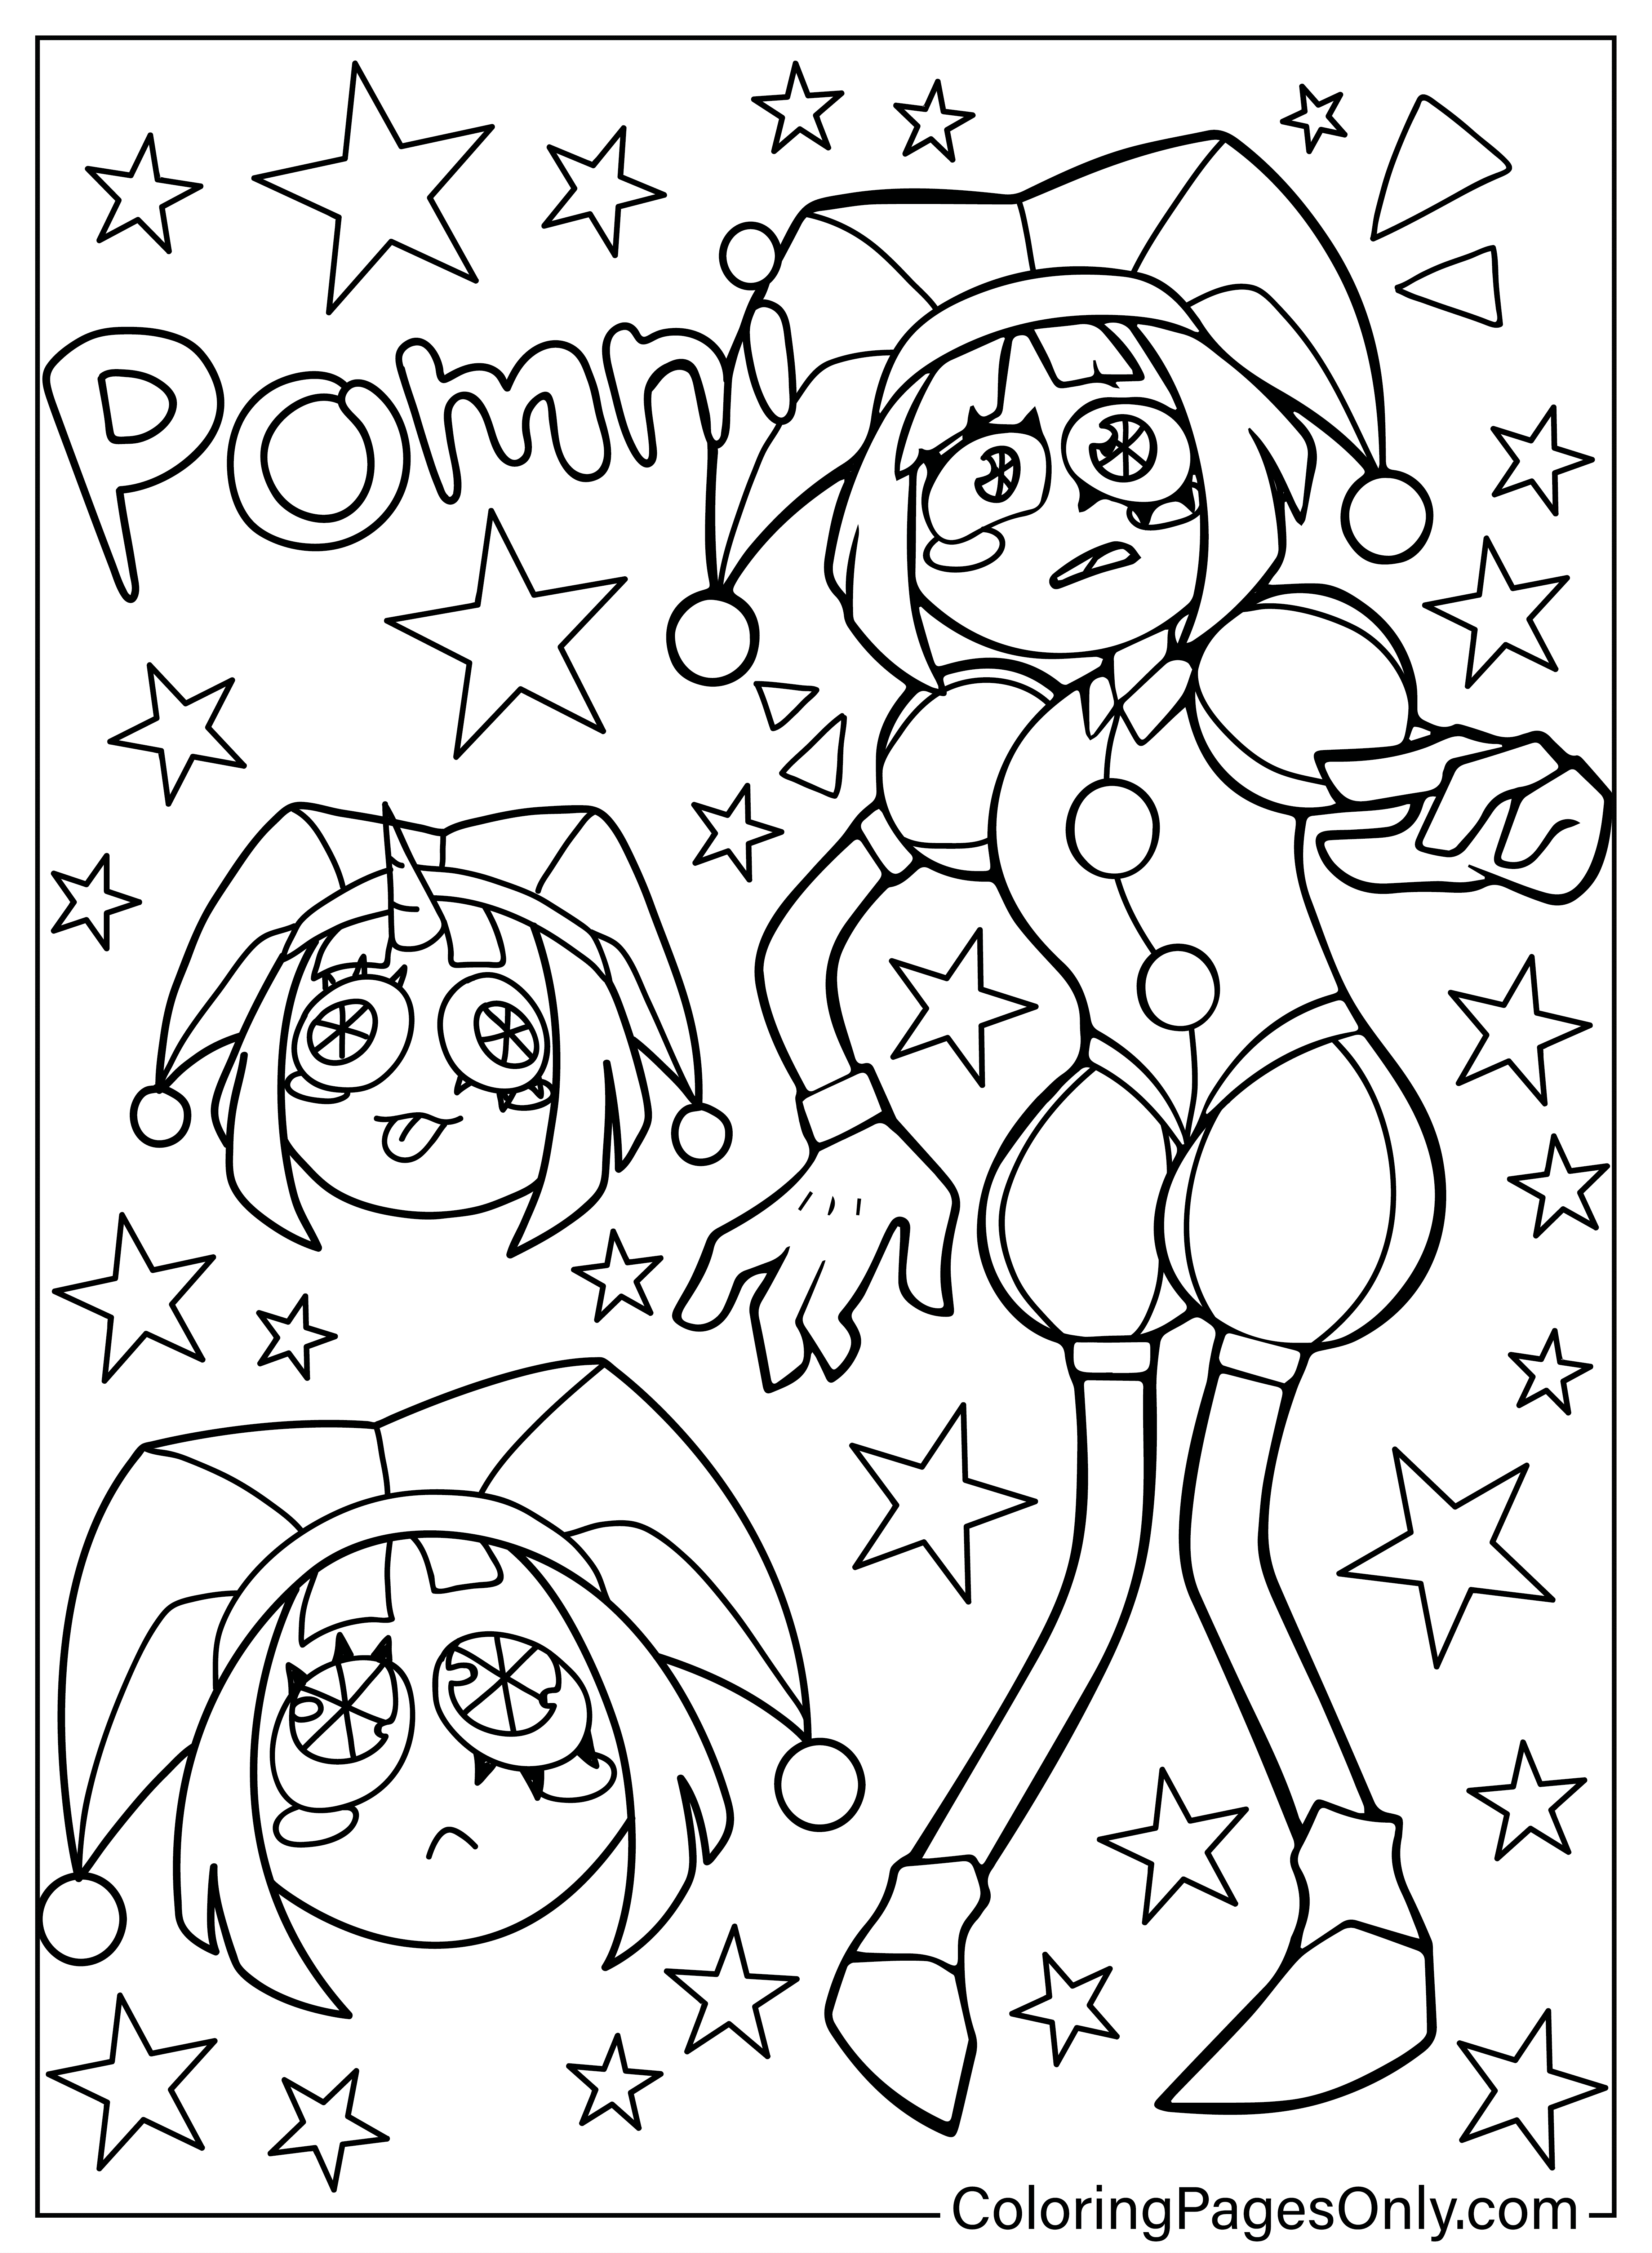 Pomni Coloring Page to Print from Pomni